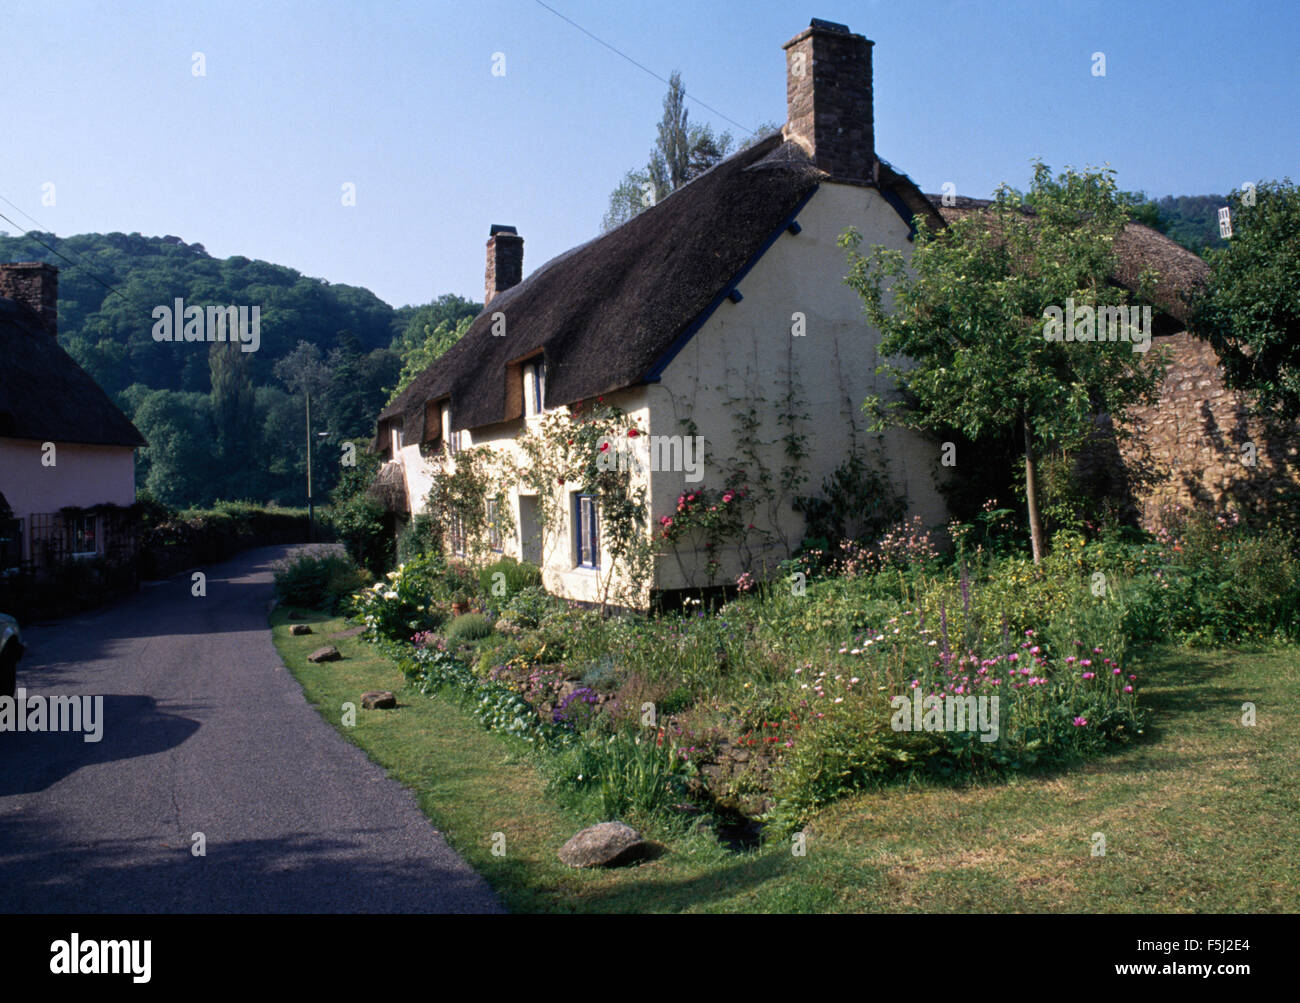 Exterior of a white country cottage with a thatched roof and summer flowers in the front garden Stock Photo